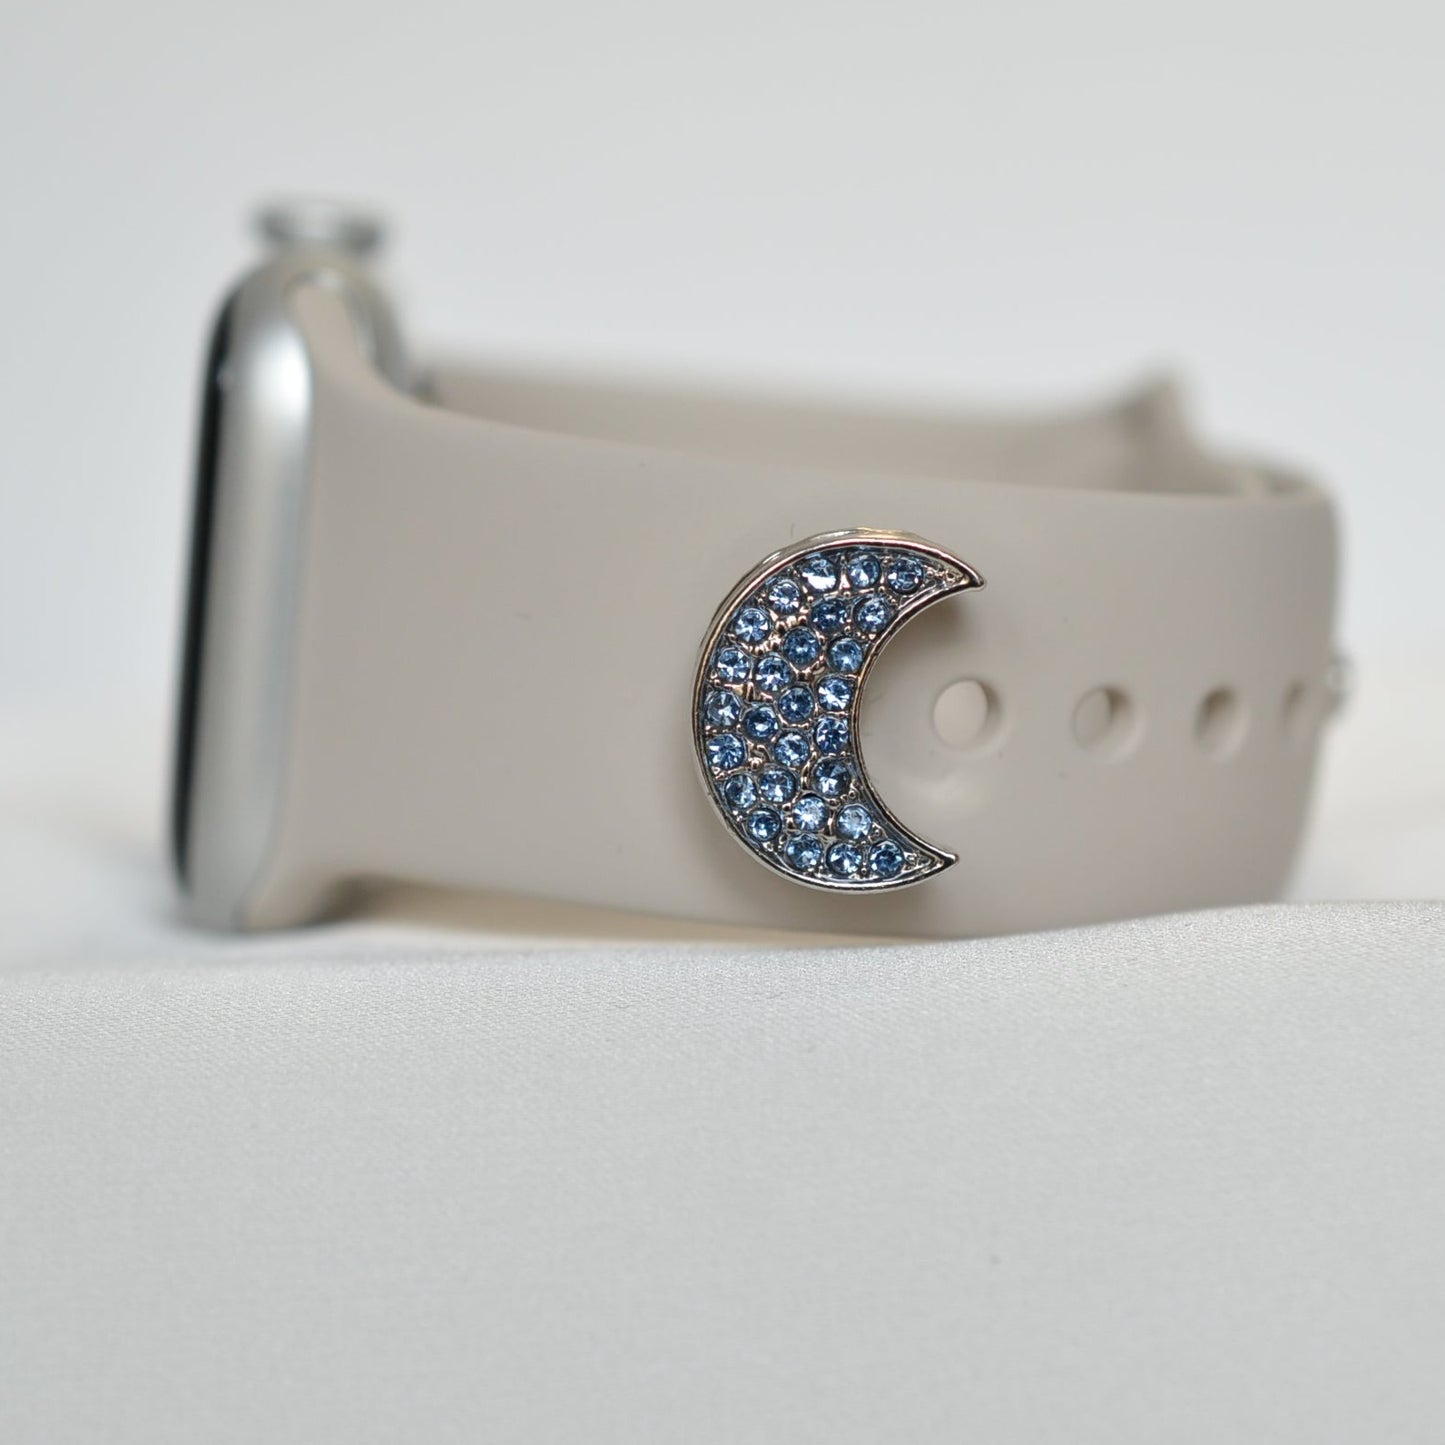 Blue Moon Charm for Belt, Bag and Watch Bands